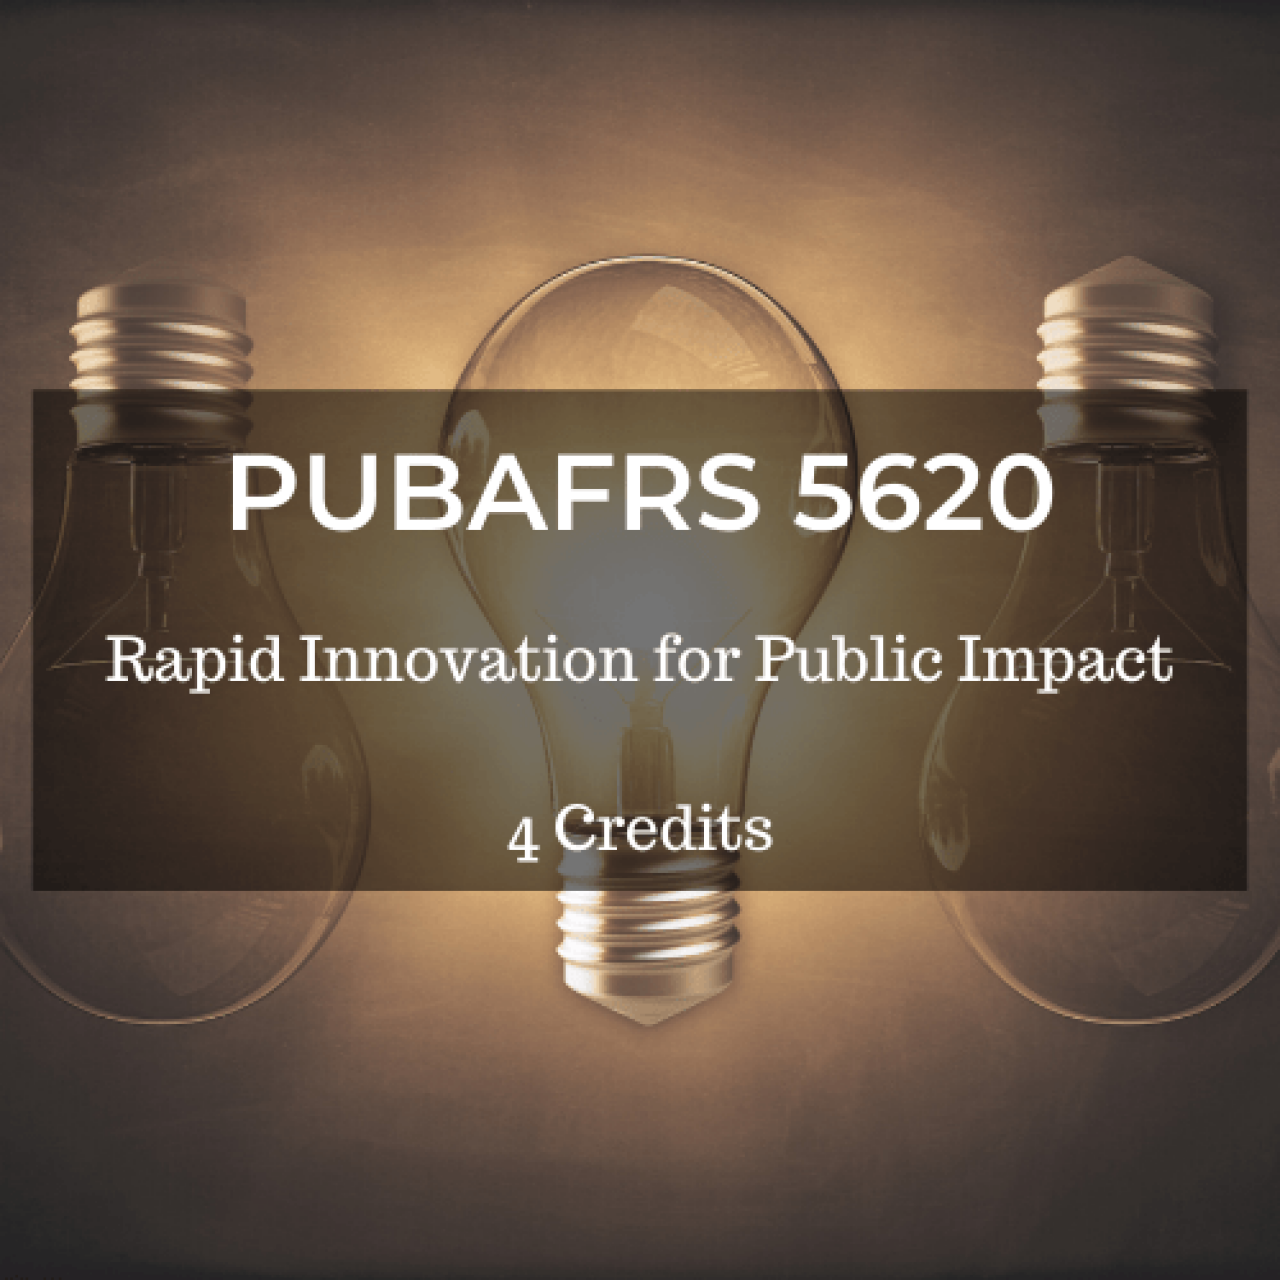 Three light bulbs alternating up and down with the center one lit and the words "PUBAFRS 5620 Rapid Innovation for Public Impact 4 credits" laid on top of the picture.